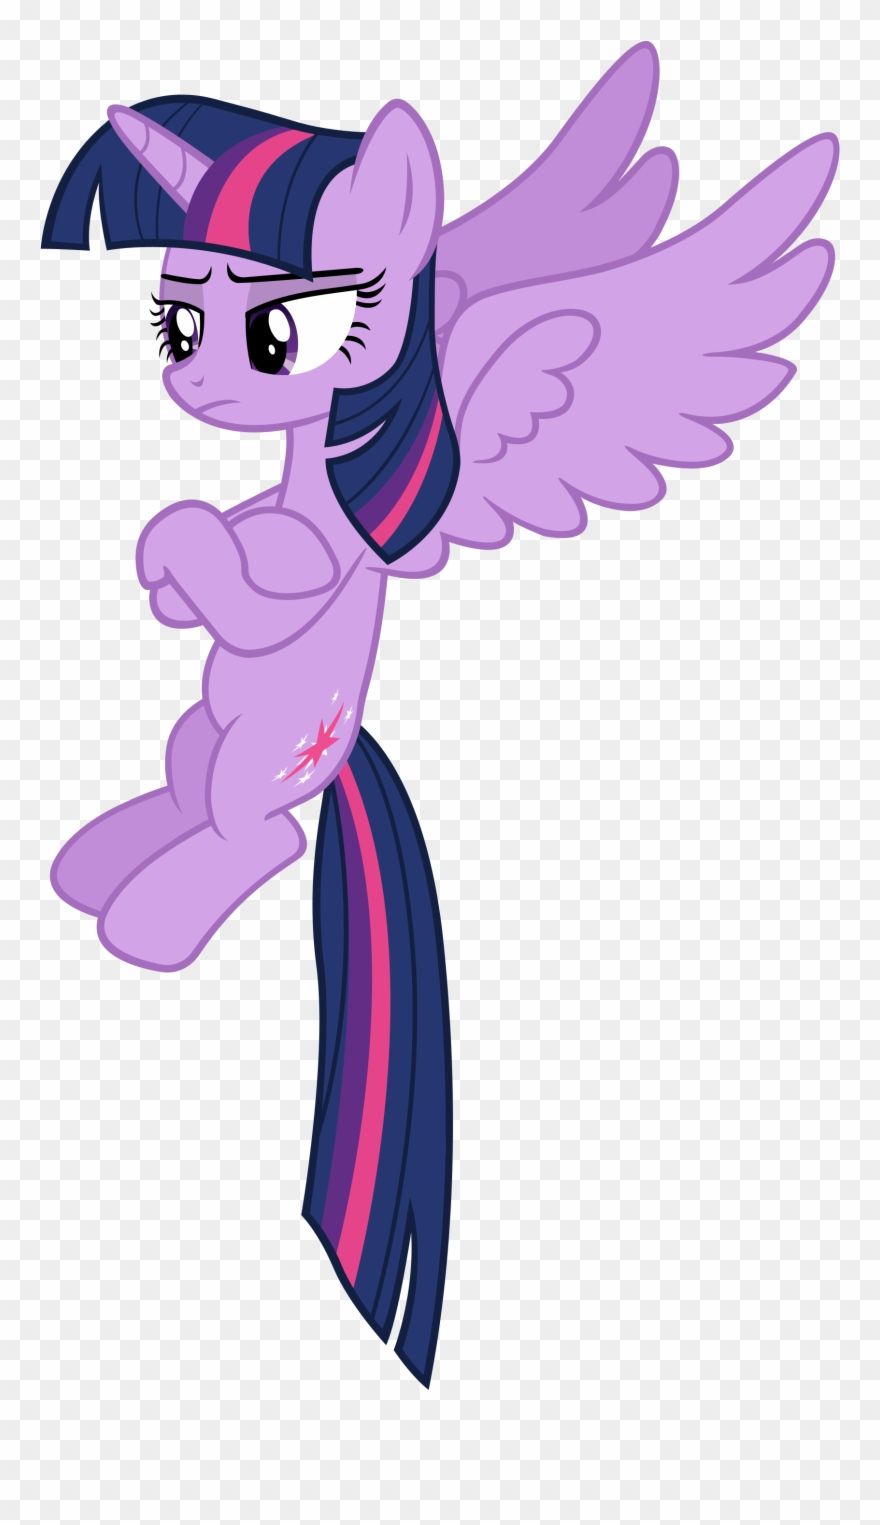 Source Needed, Transparent Background, Twilight Is Little Pony Twilight Sparkle Princess Fly Clipart